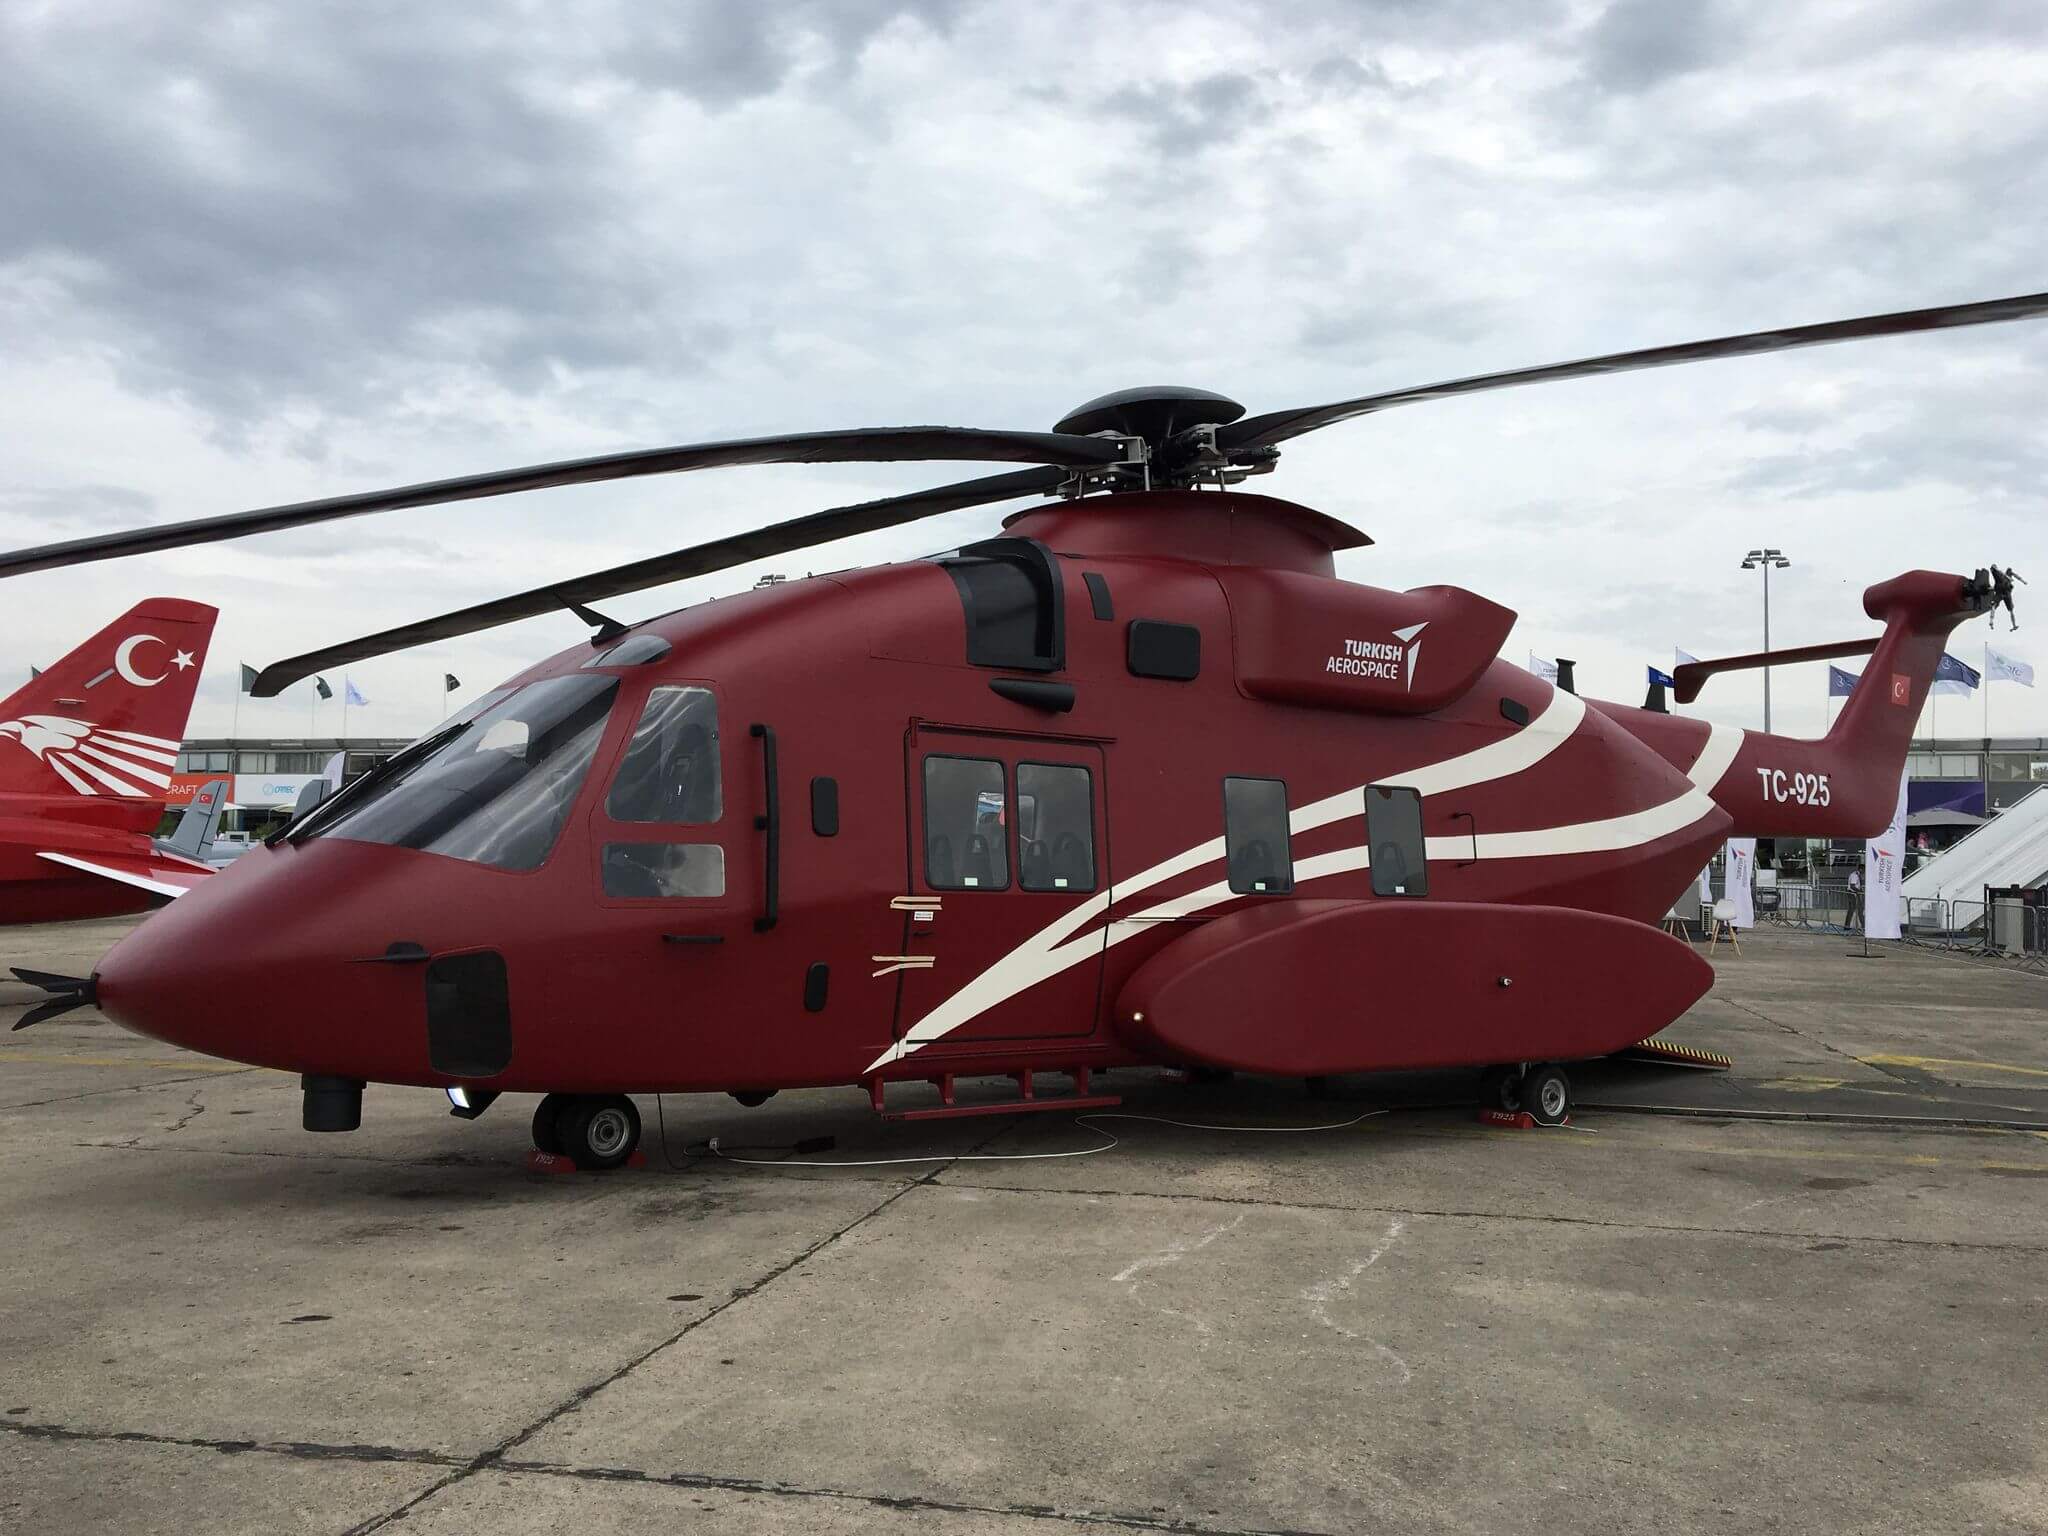 Turkish Aerospace presents a new heavy helicopter powered by a Ukrainian engine manufacturer